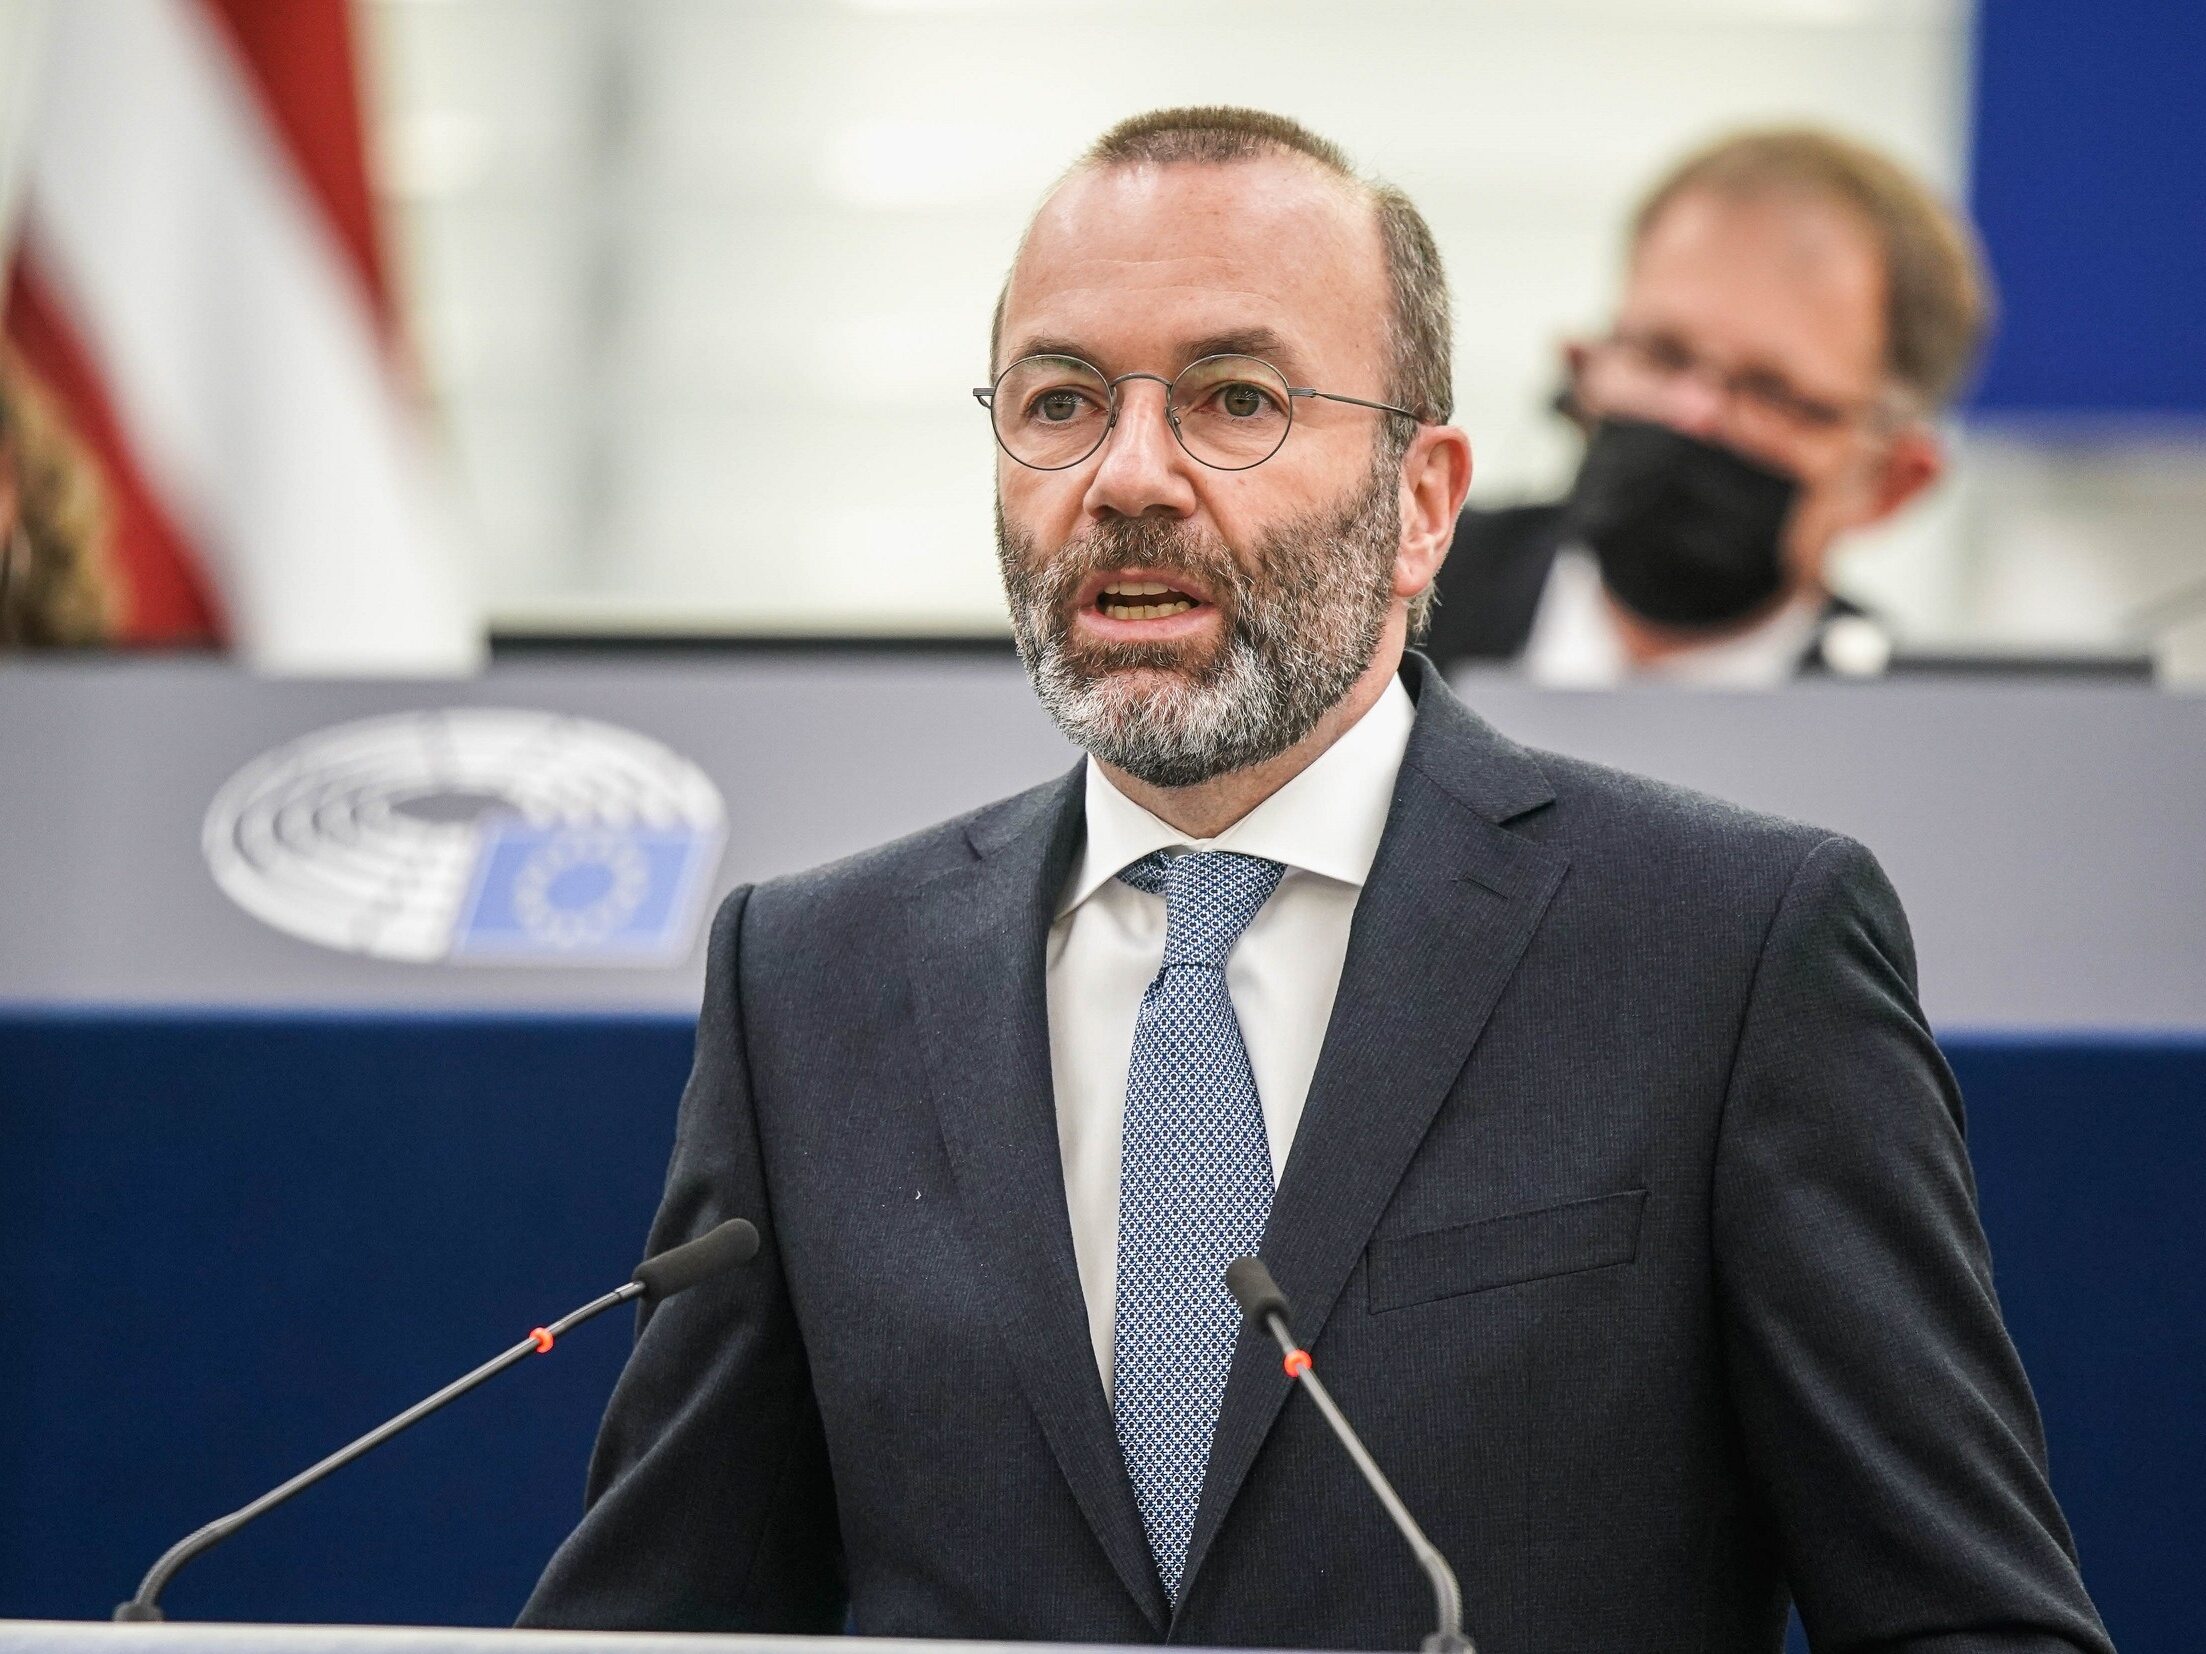 Manfred Weber replied to the Polish Prime Minister.  It's a call to debate